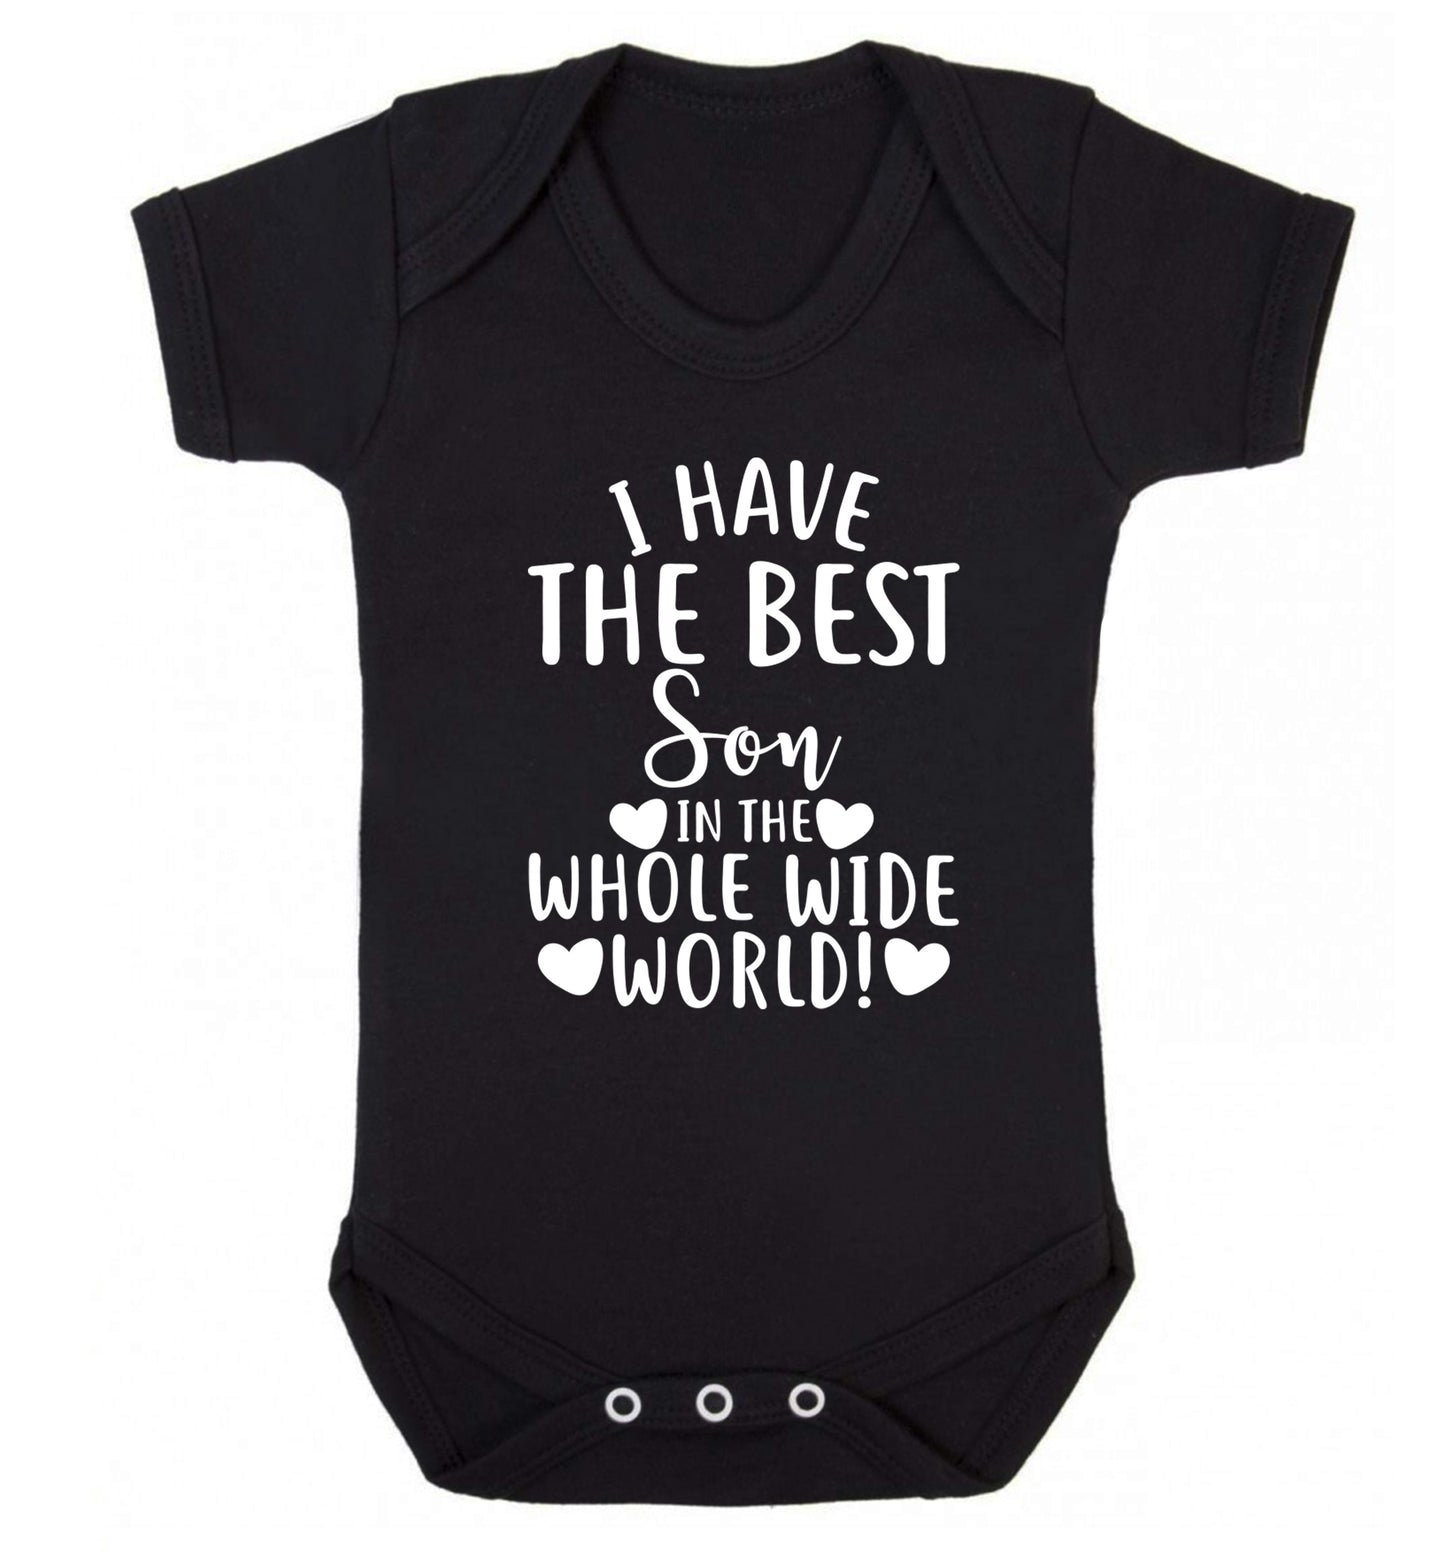 I have the best son in the whole wide world! Baby Vest black 18-24 months